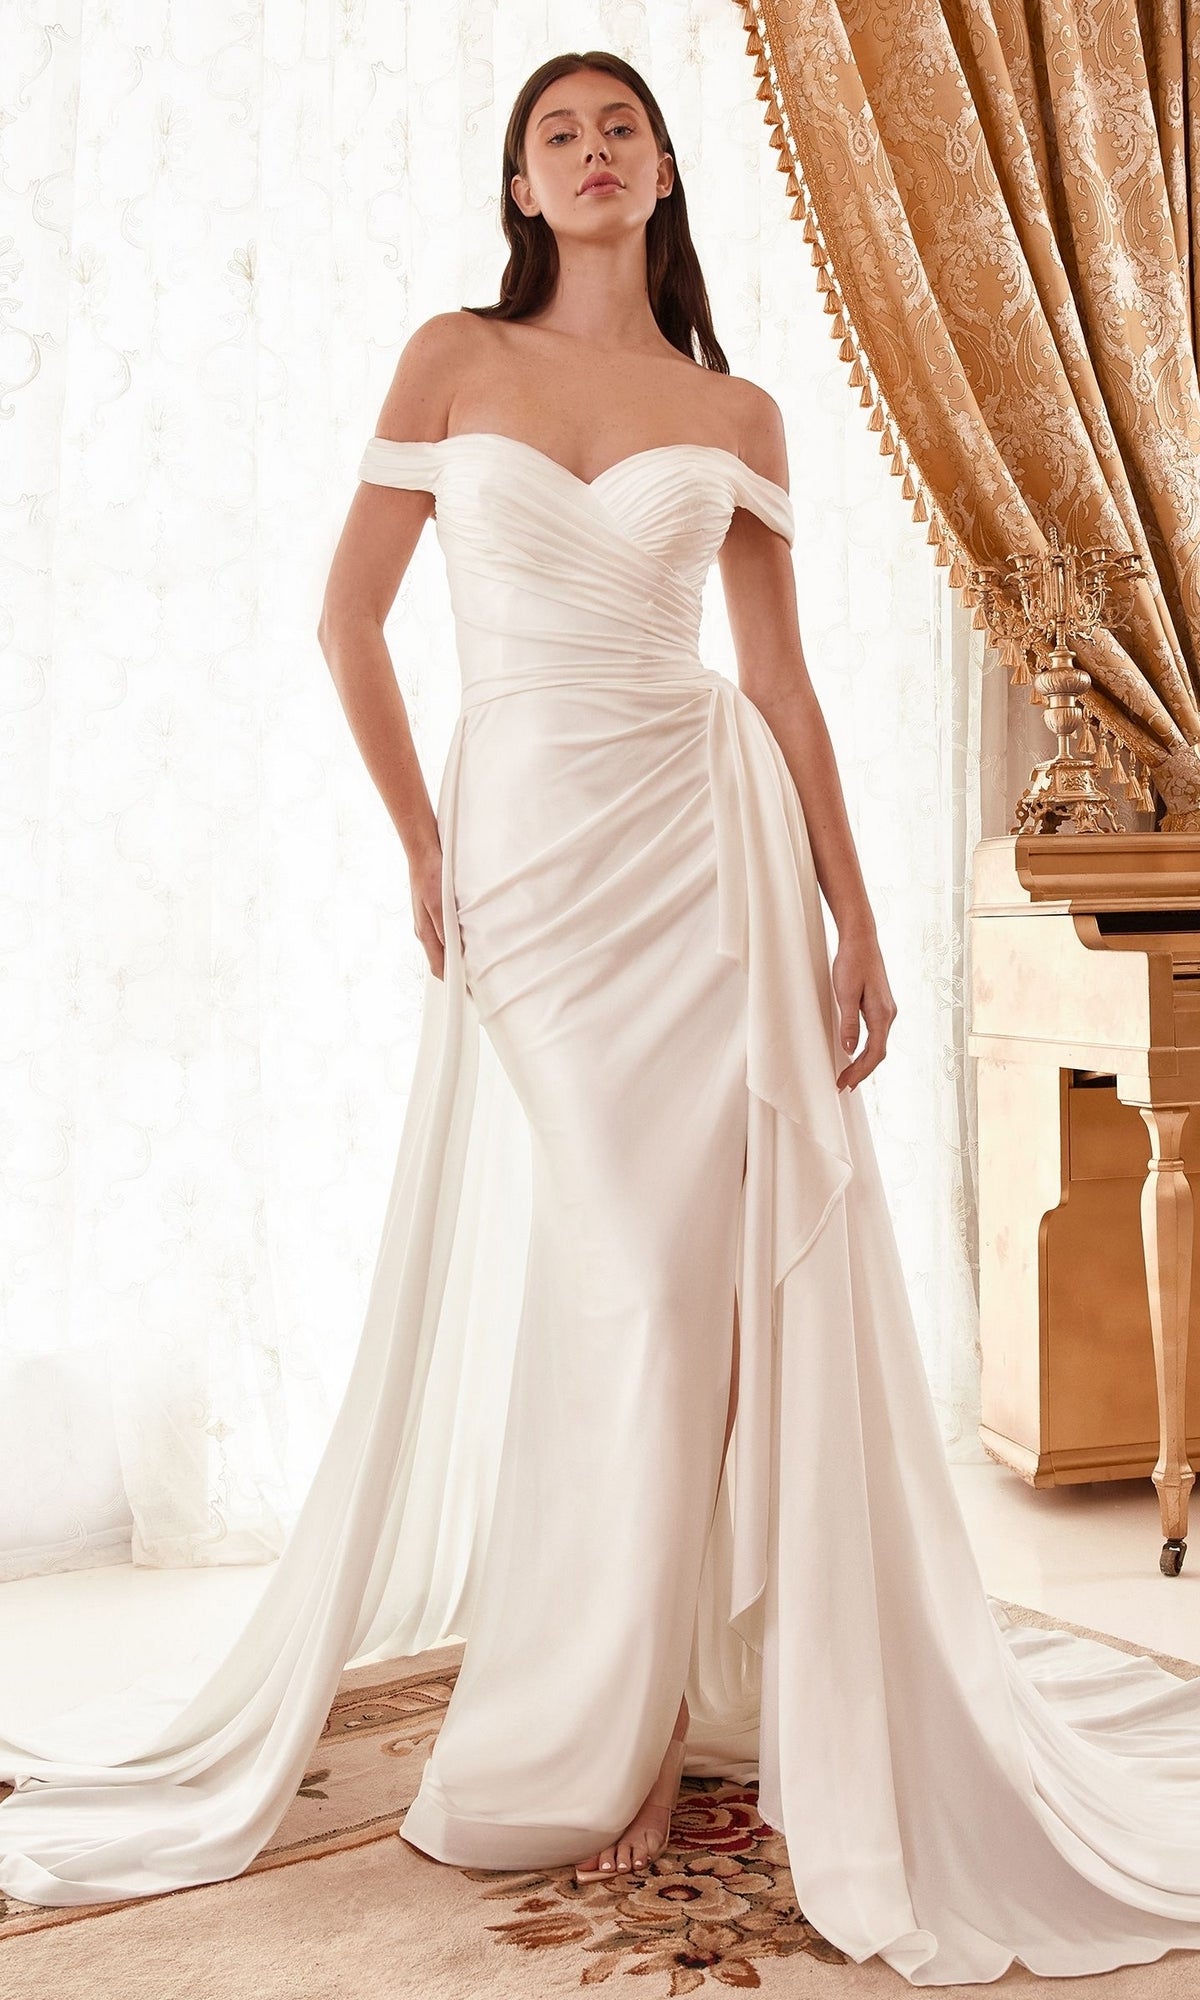 Off-Shoulder White Bridal Gown WN315